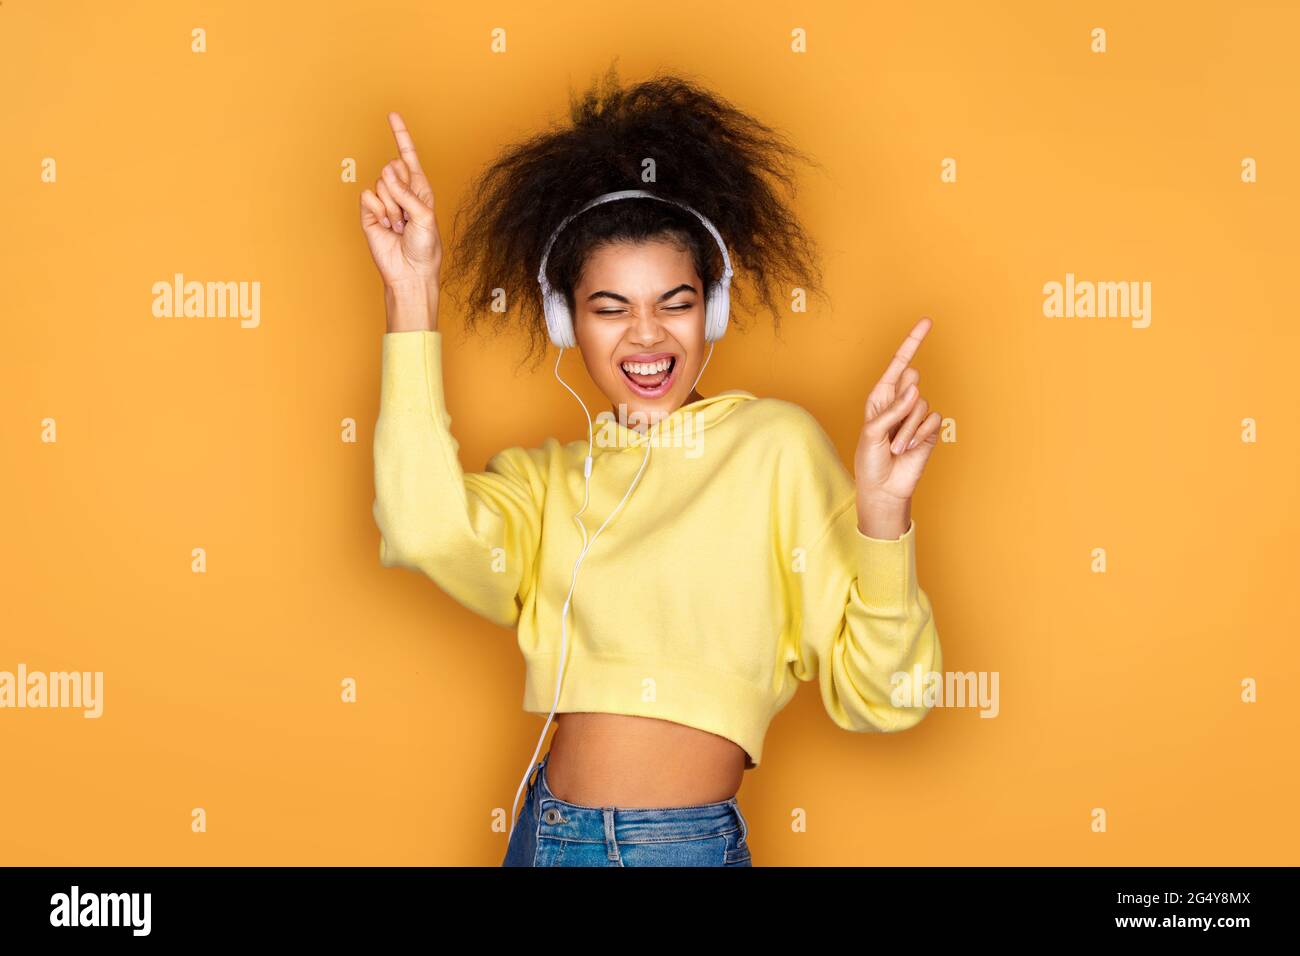 Joyful girl in headphone, raises hand in dance move and sings loudly on yellow background Stock Photo